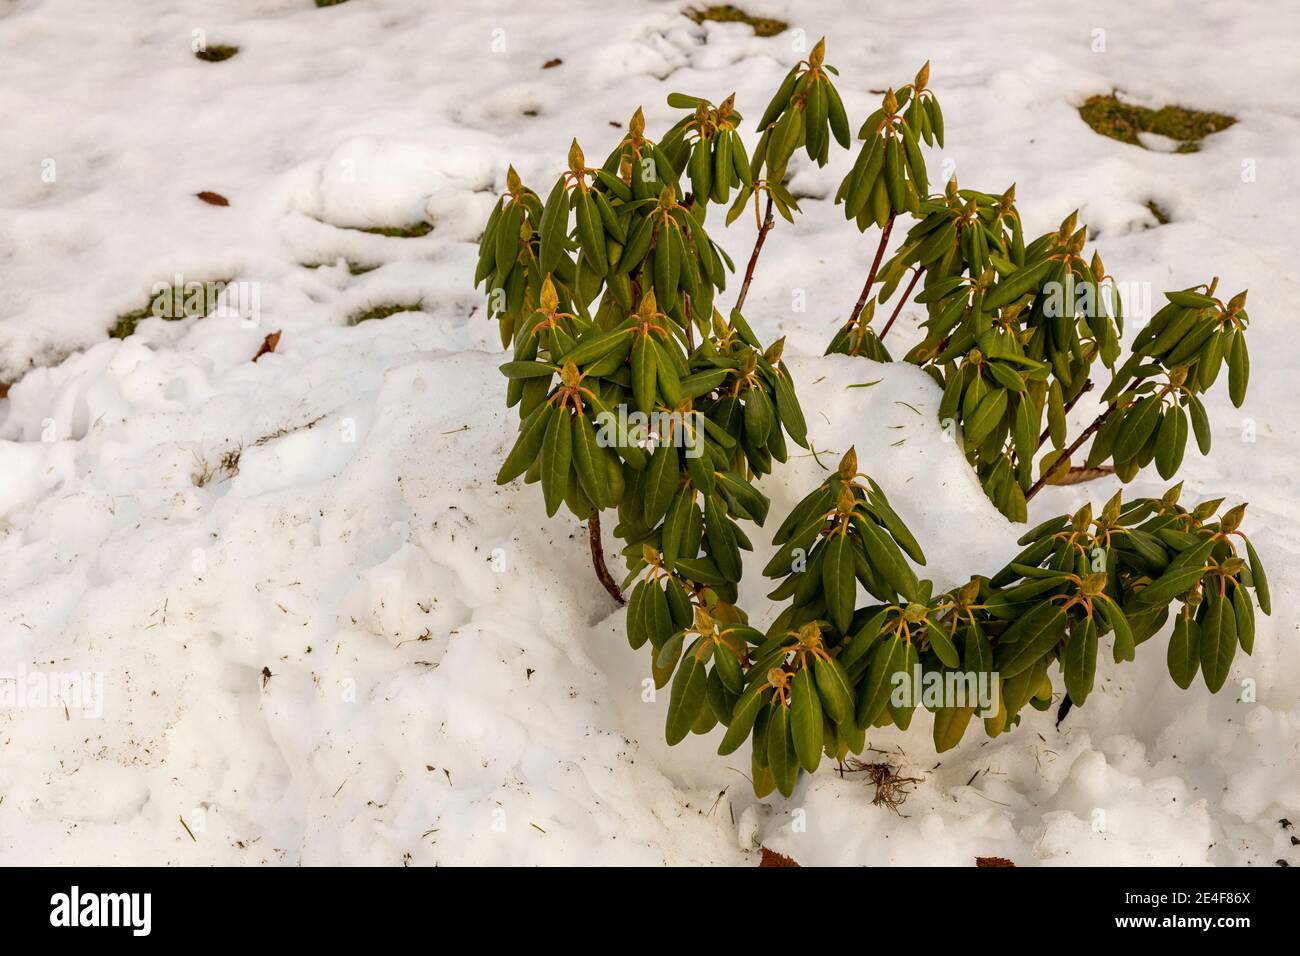 Close up view of rhododendron plant under snow. Beautiful nature backgrounds. Stock Photo